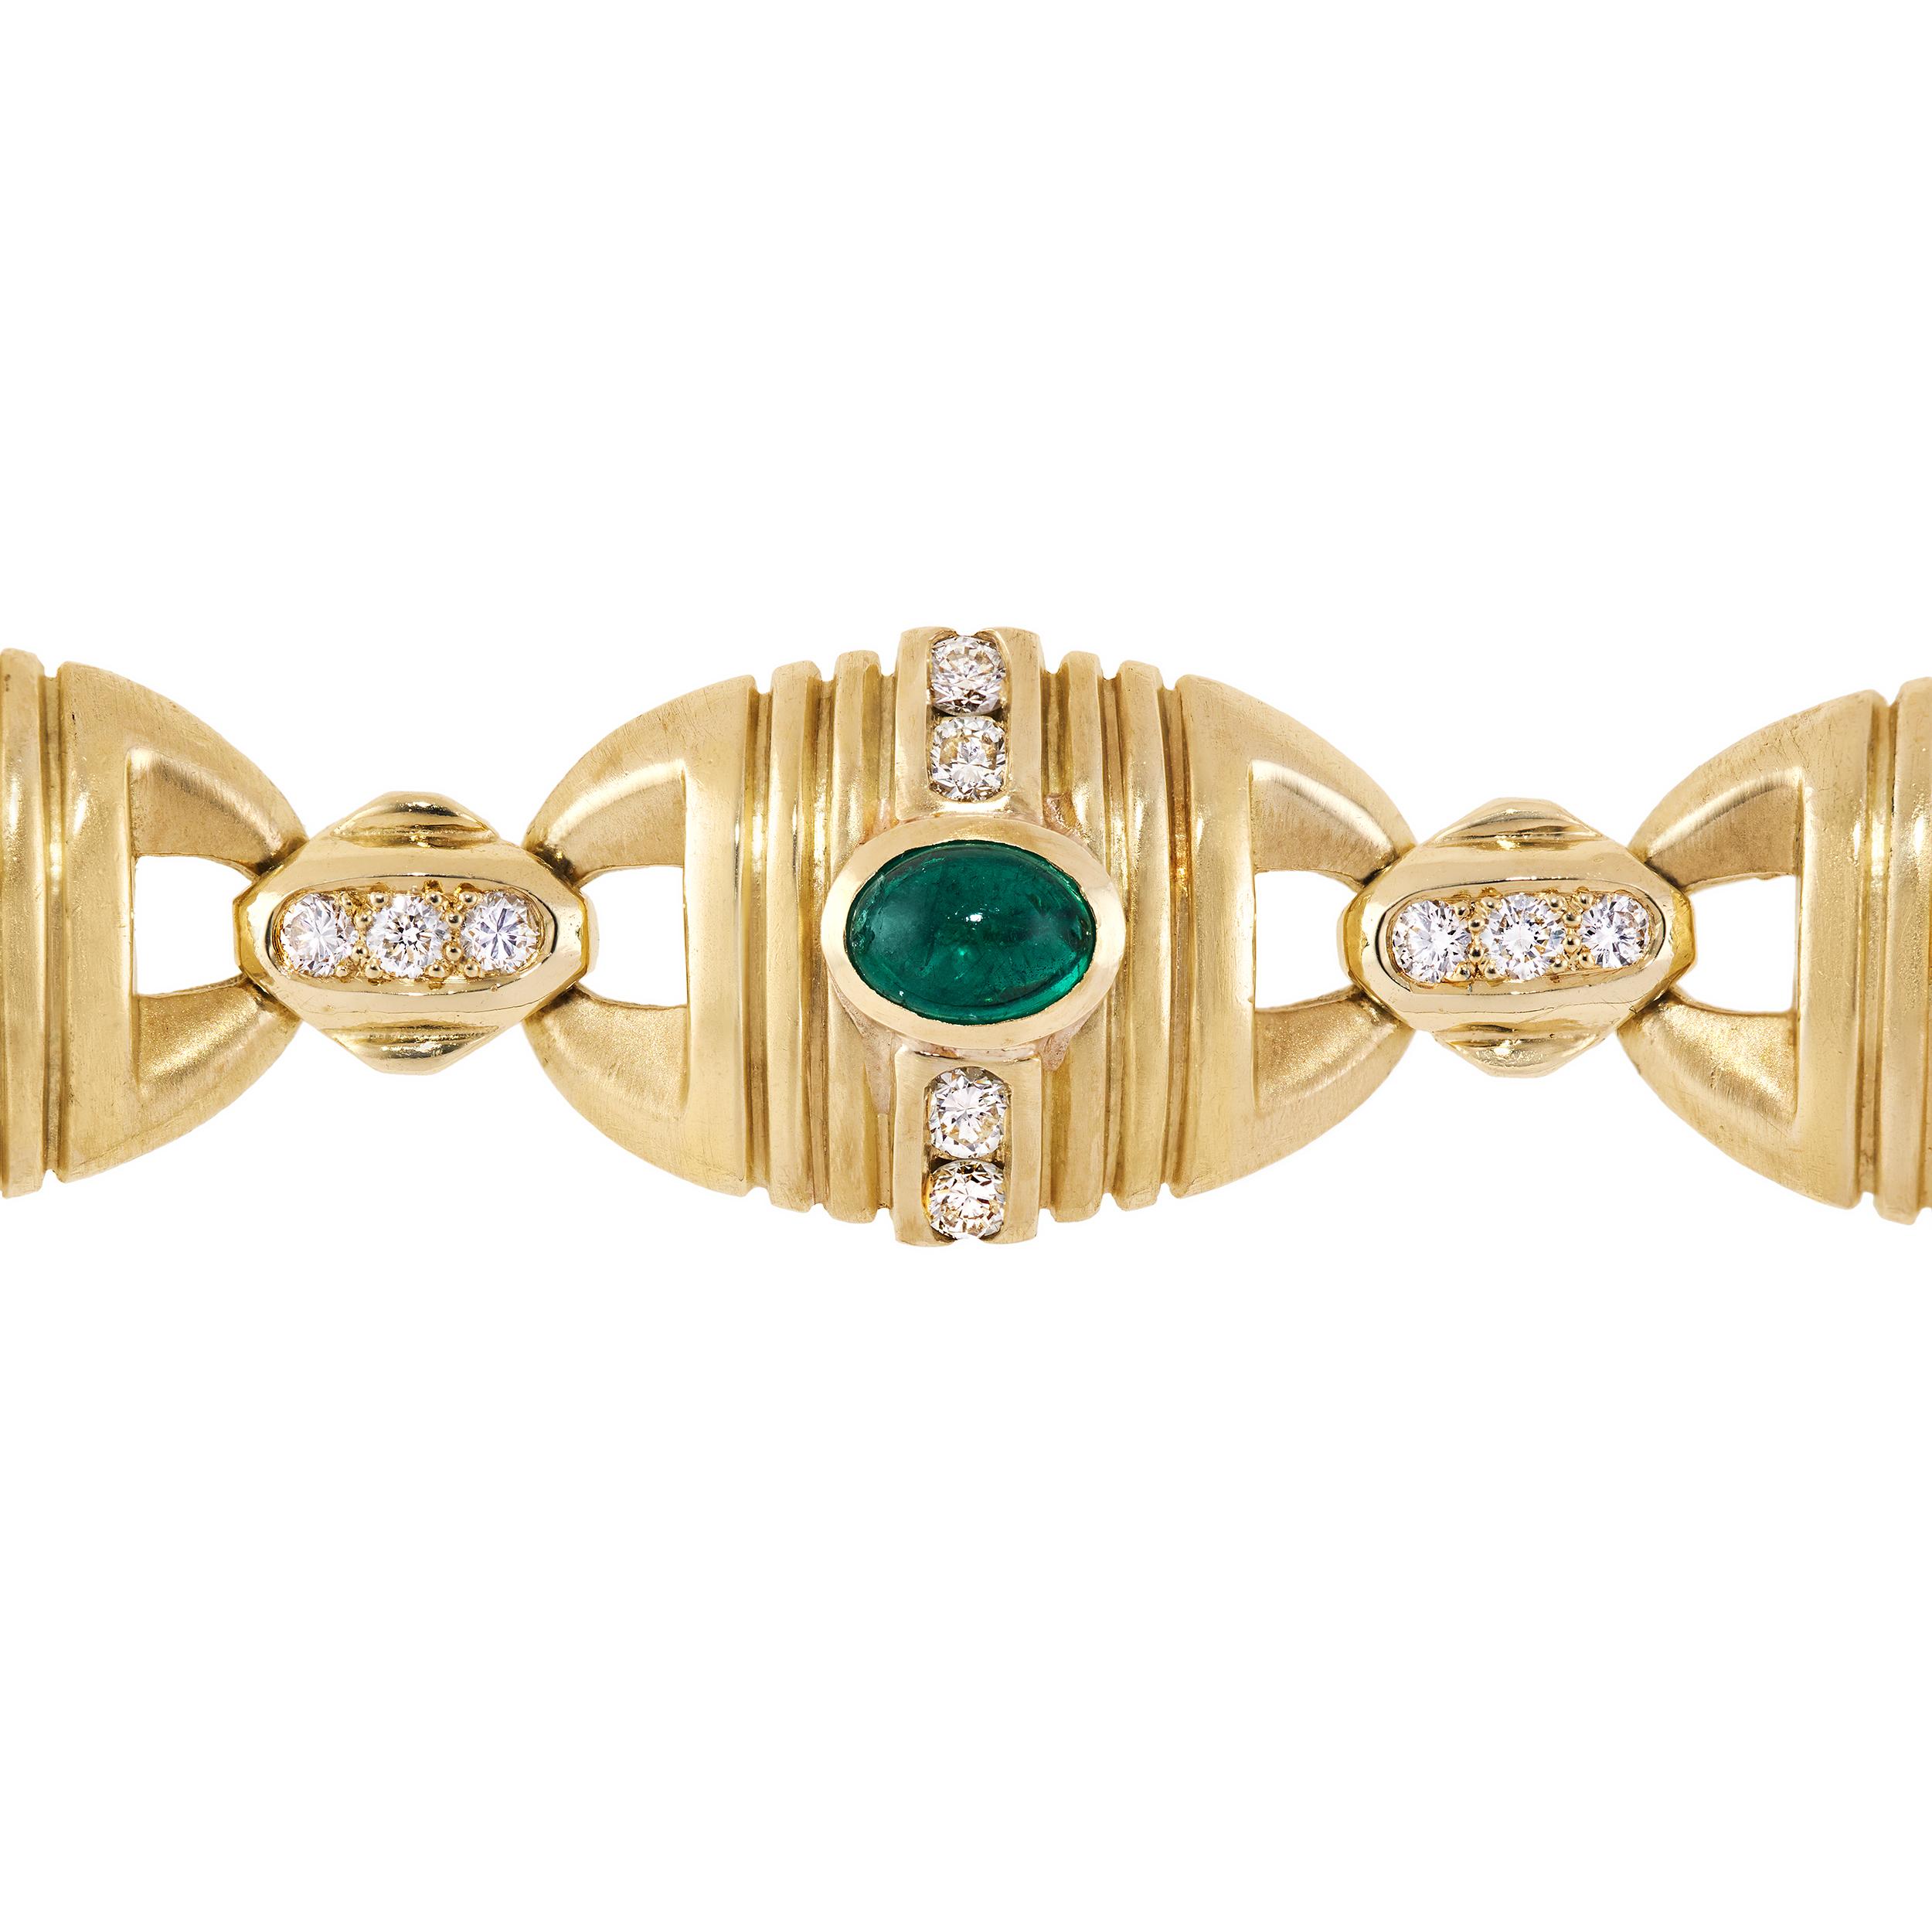 Contemporary 10.50 Carat Emerald Cabochon and Diamond Bracelet in 18 Karat Yellow Gold For Sale